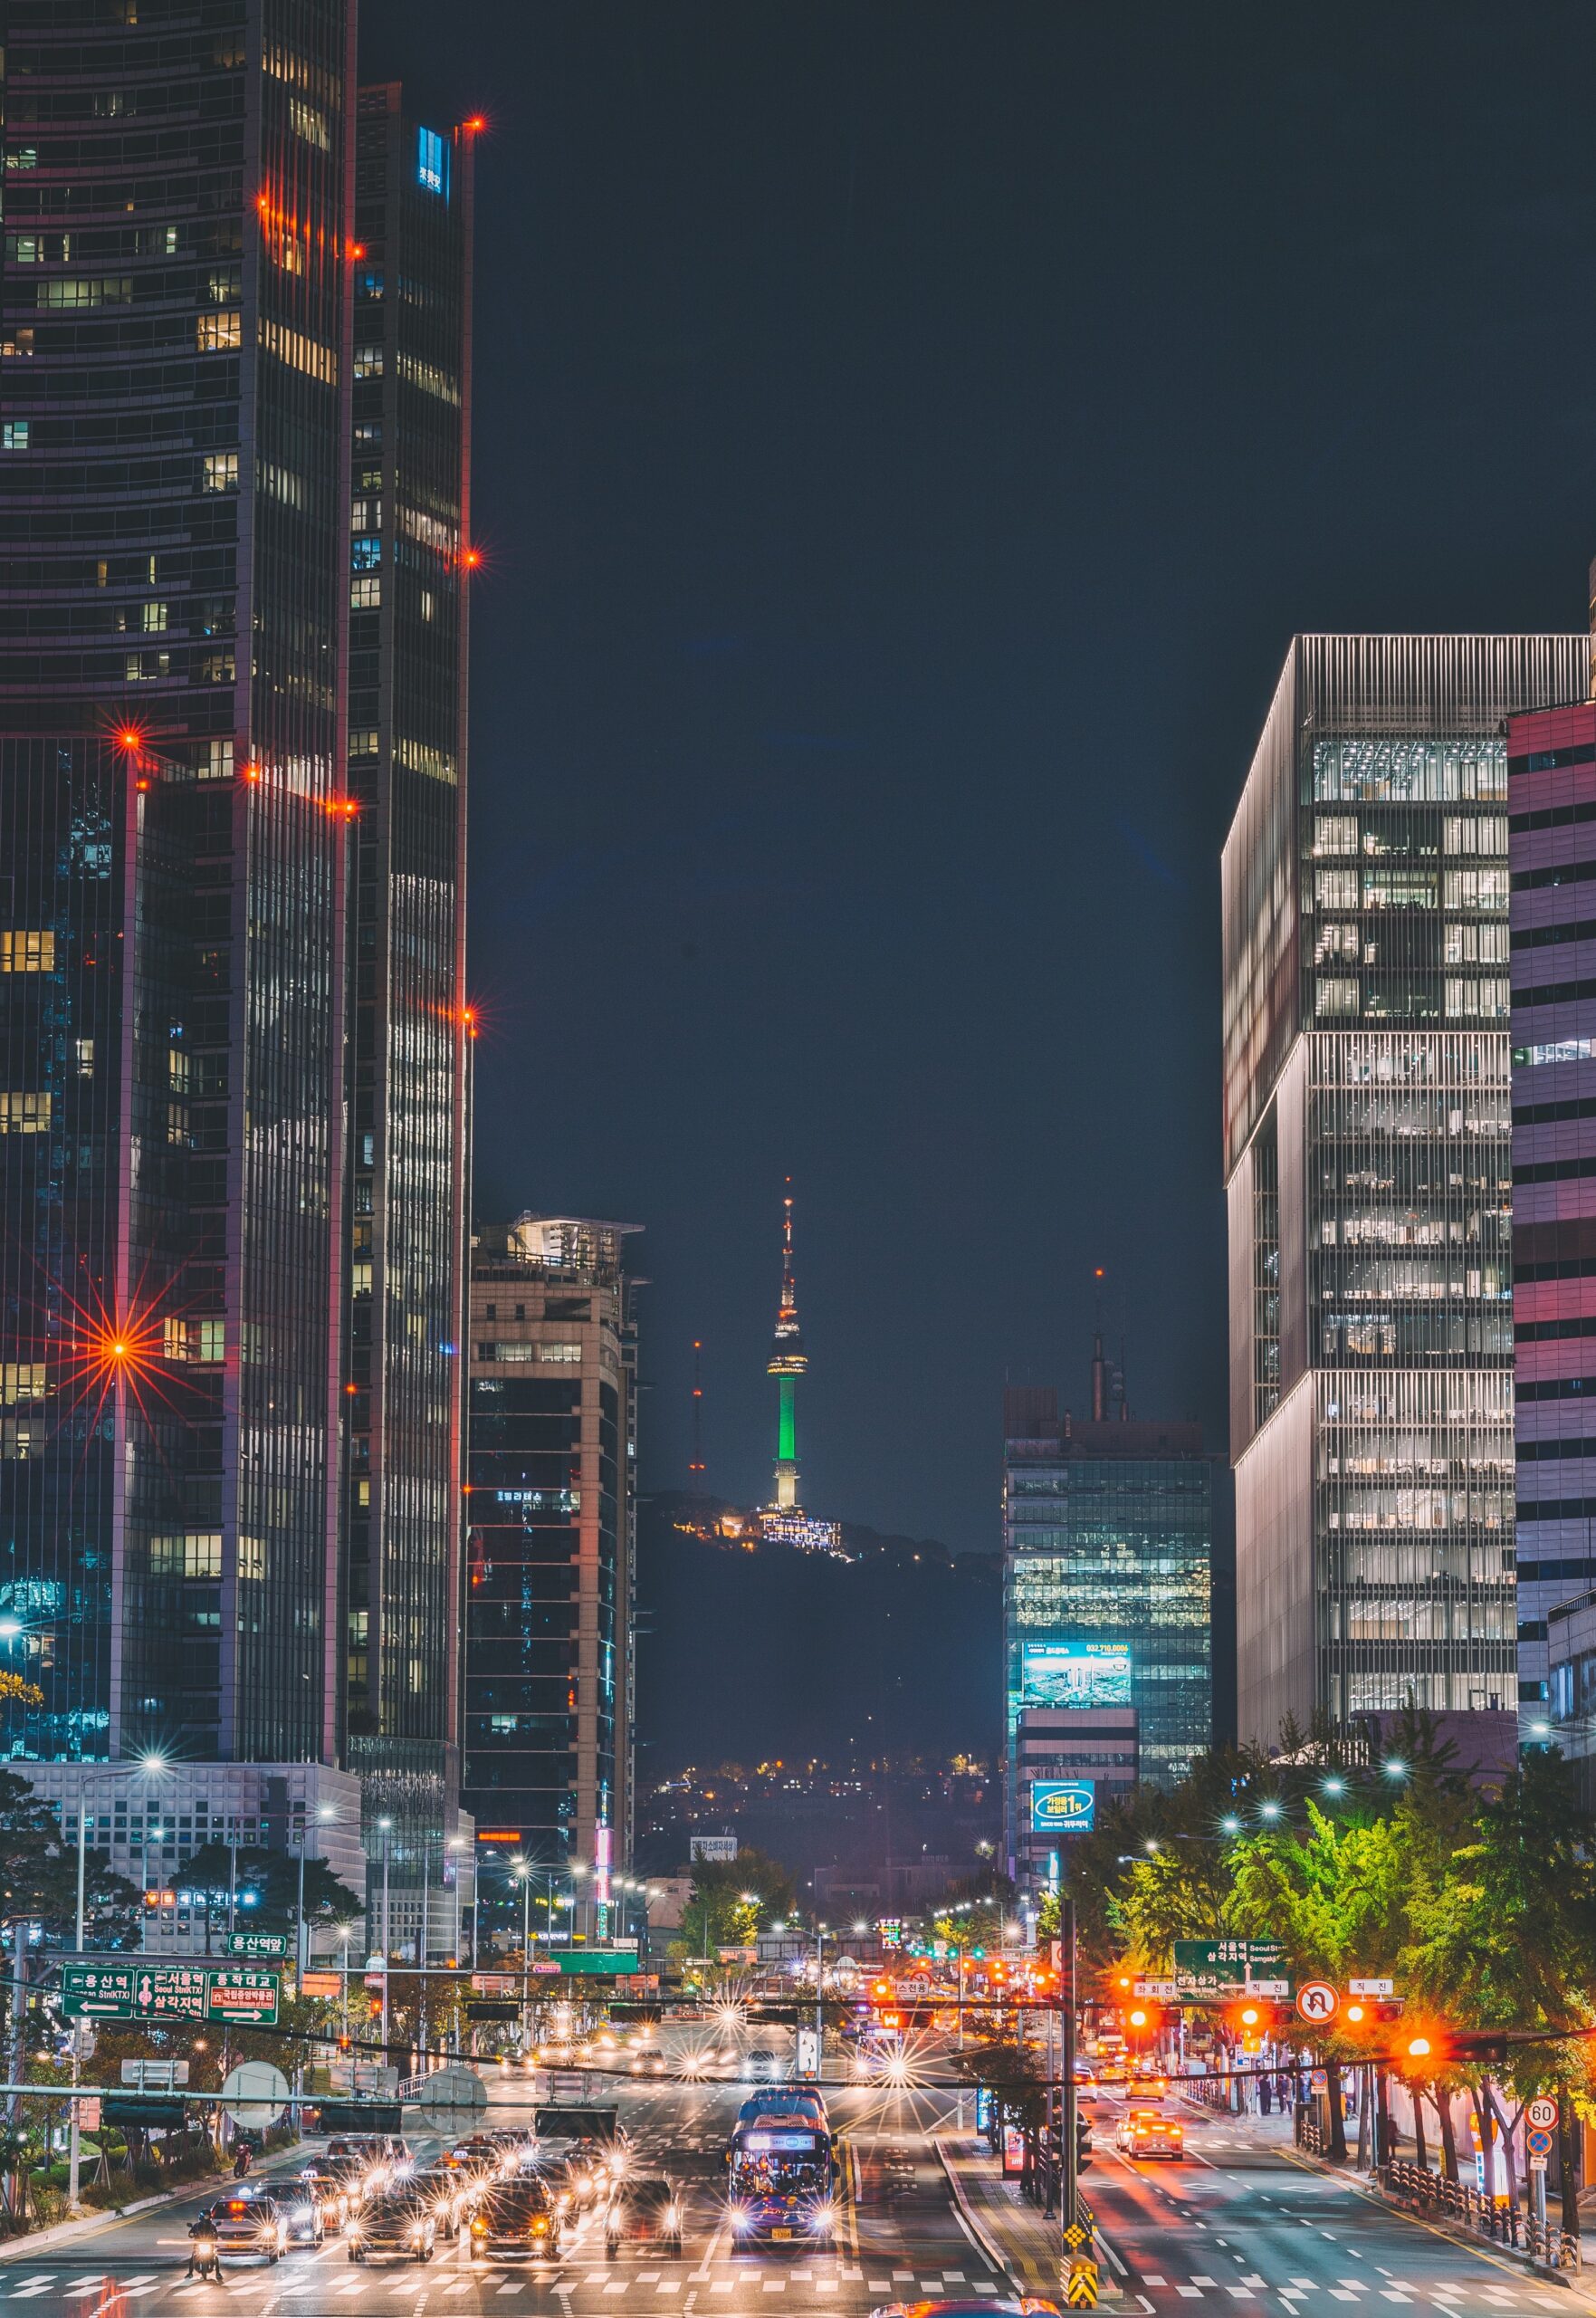 A photograph of Seoul, South Korea at night. In the foreground are cars and buildings, and in the background is Namsan and an illuminated N Seoul Tower.